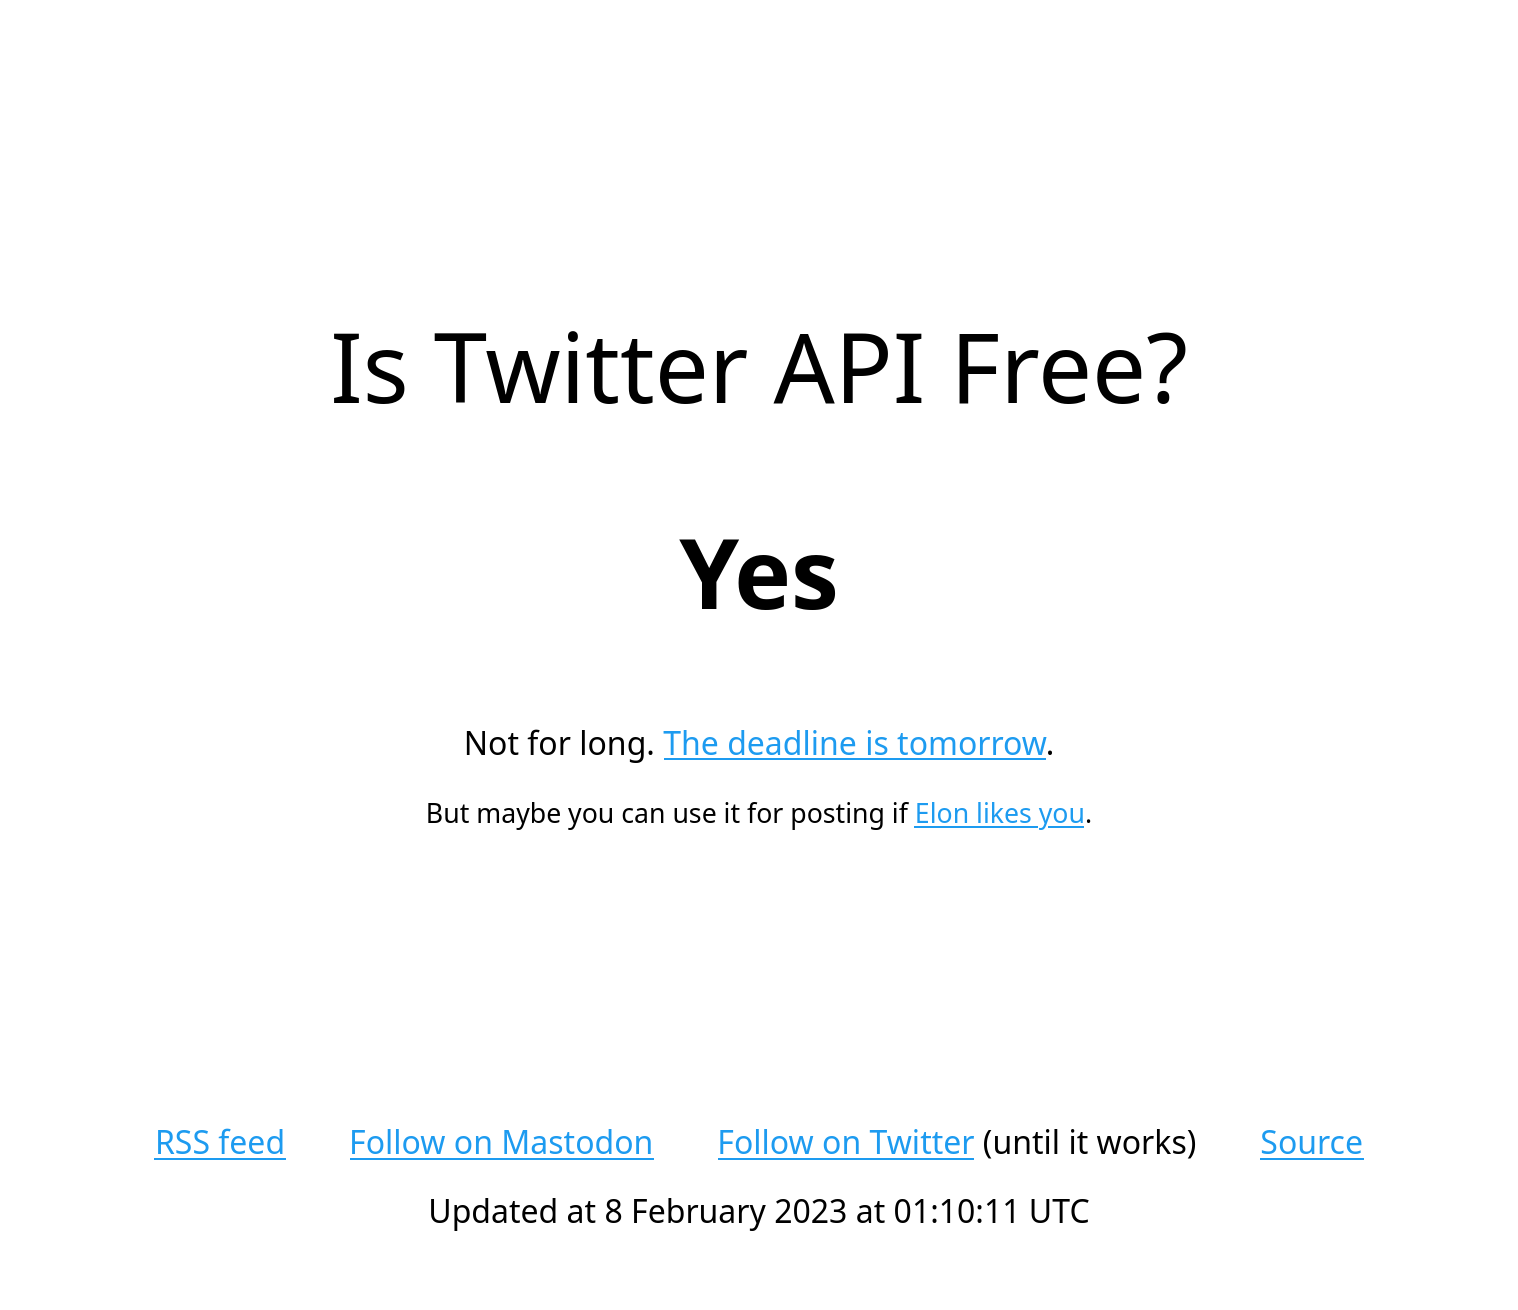 Screenshot of the website: Is Twitter API free? Yes. Not for long. The deadline is tomorrow. But maybe you can use it for posting if Elon likes you